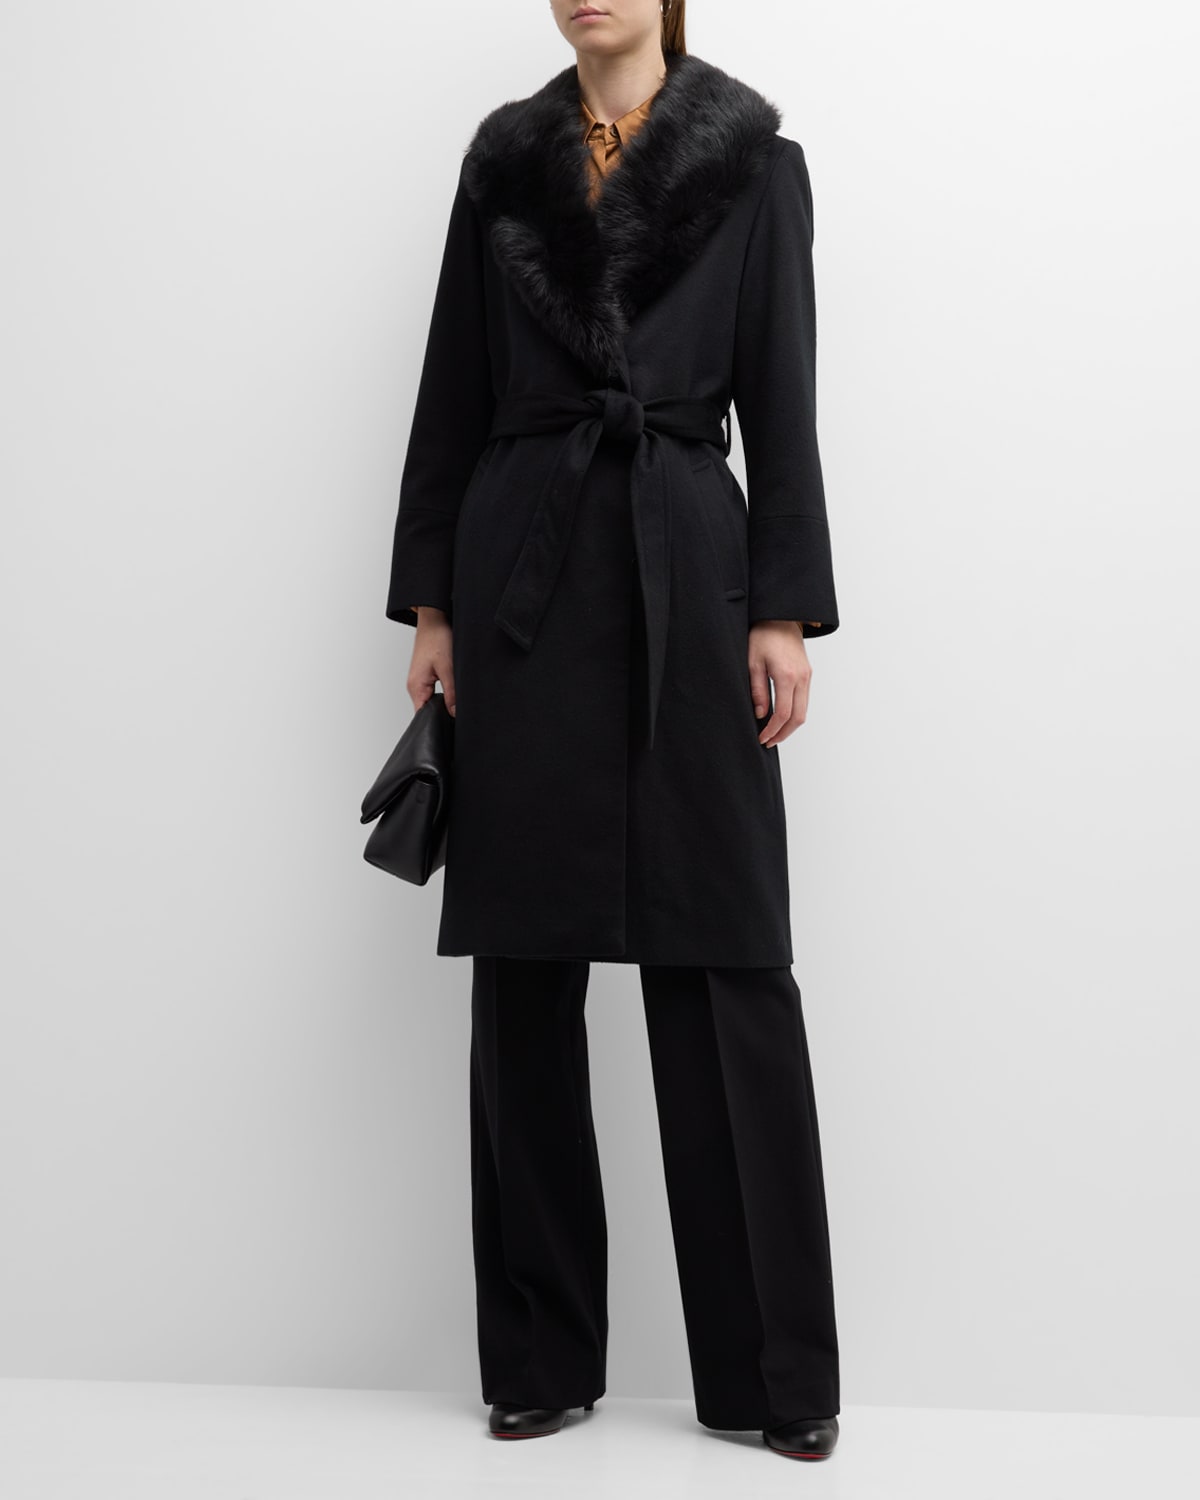 Sofia Cashmere Cashmere Belted Cape Coat with Shearling Collar | Neiman ...